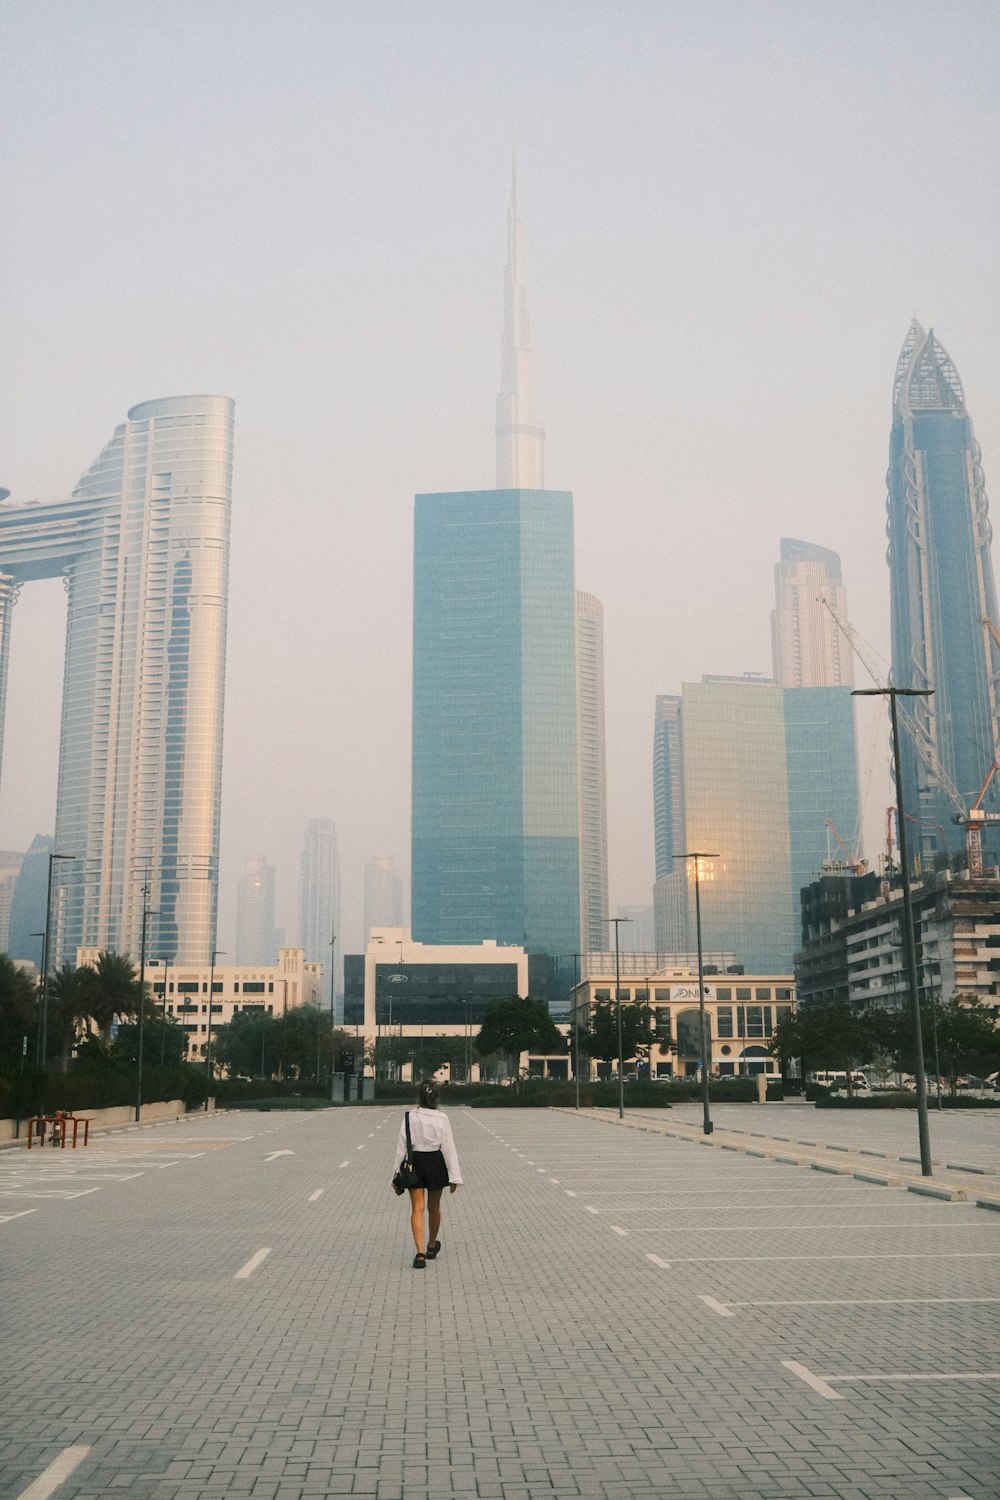 a person walking down a street in front of tall buildings